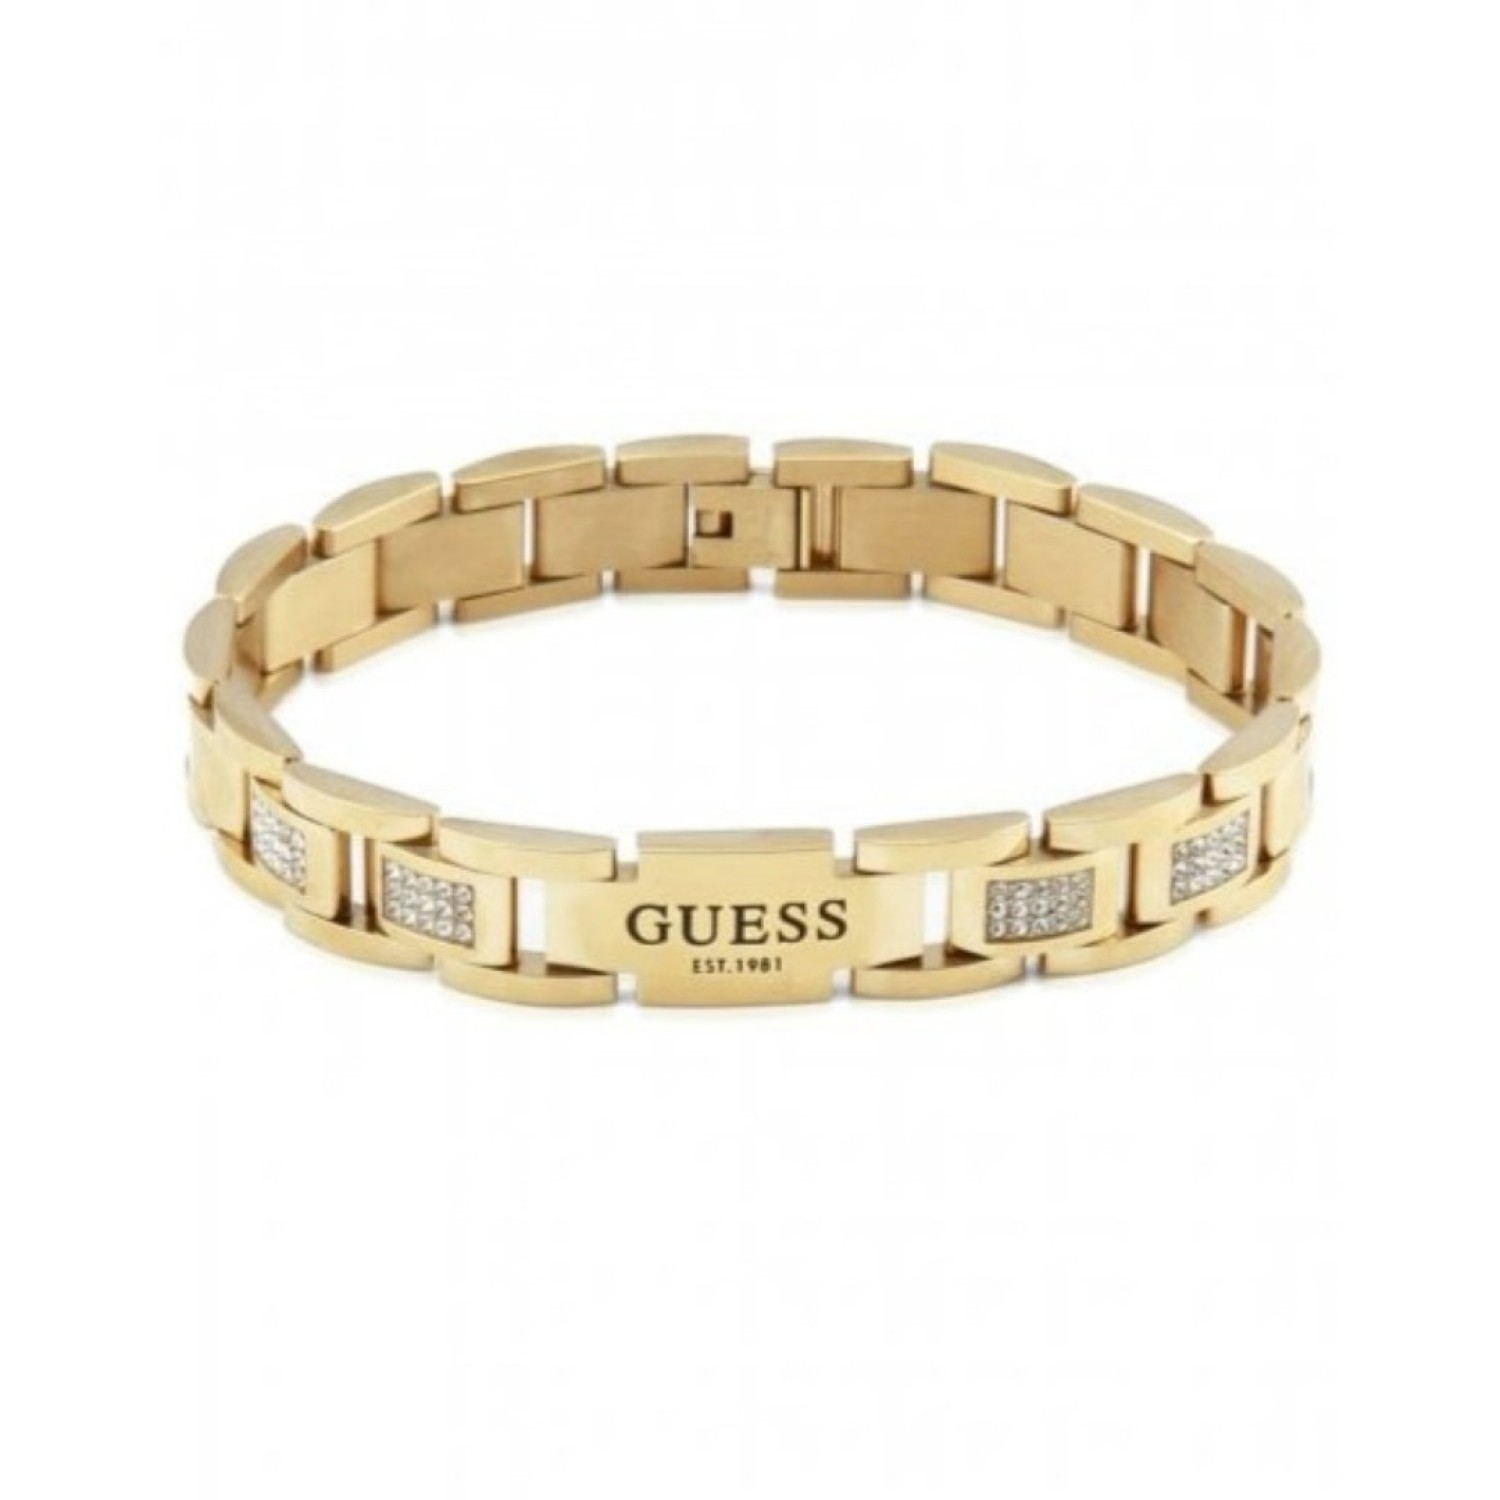 Guess Frontier Crystal Bracelet in 12mm in Gold UMB79005 guess jewellery